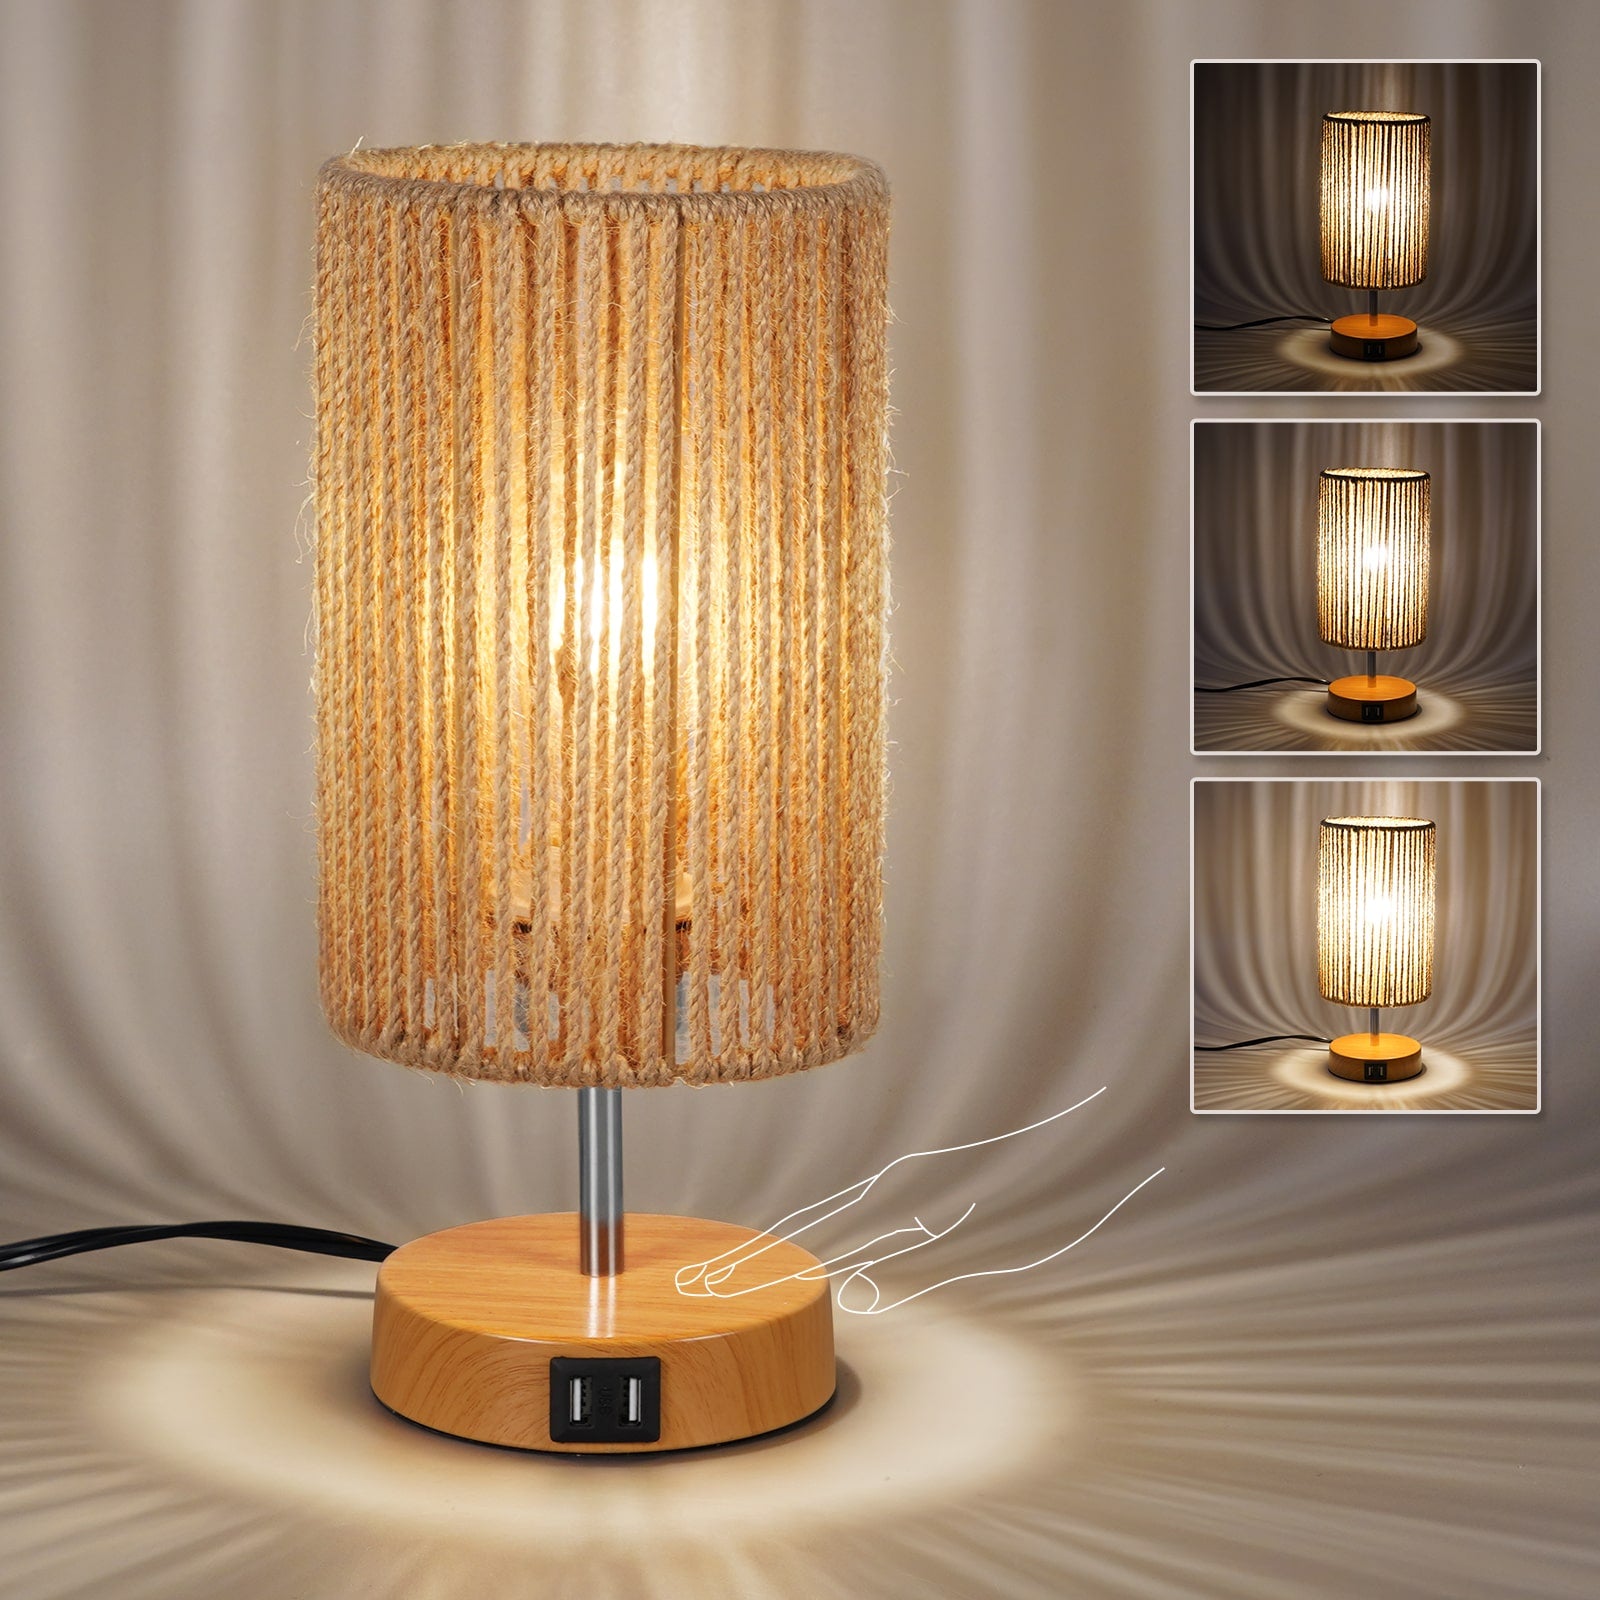 N08 Touch Rattan Table Lamp 3 Way Dimmable with USB Charging Ports